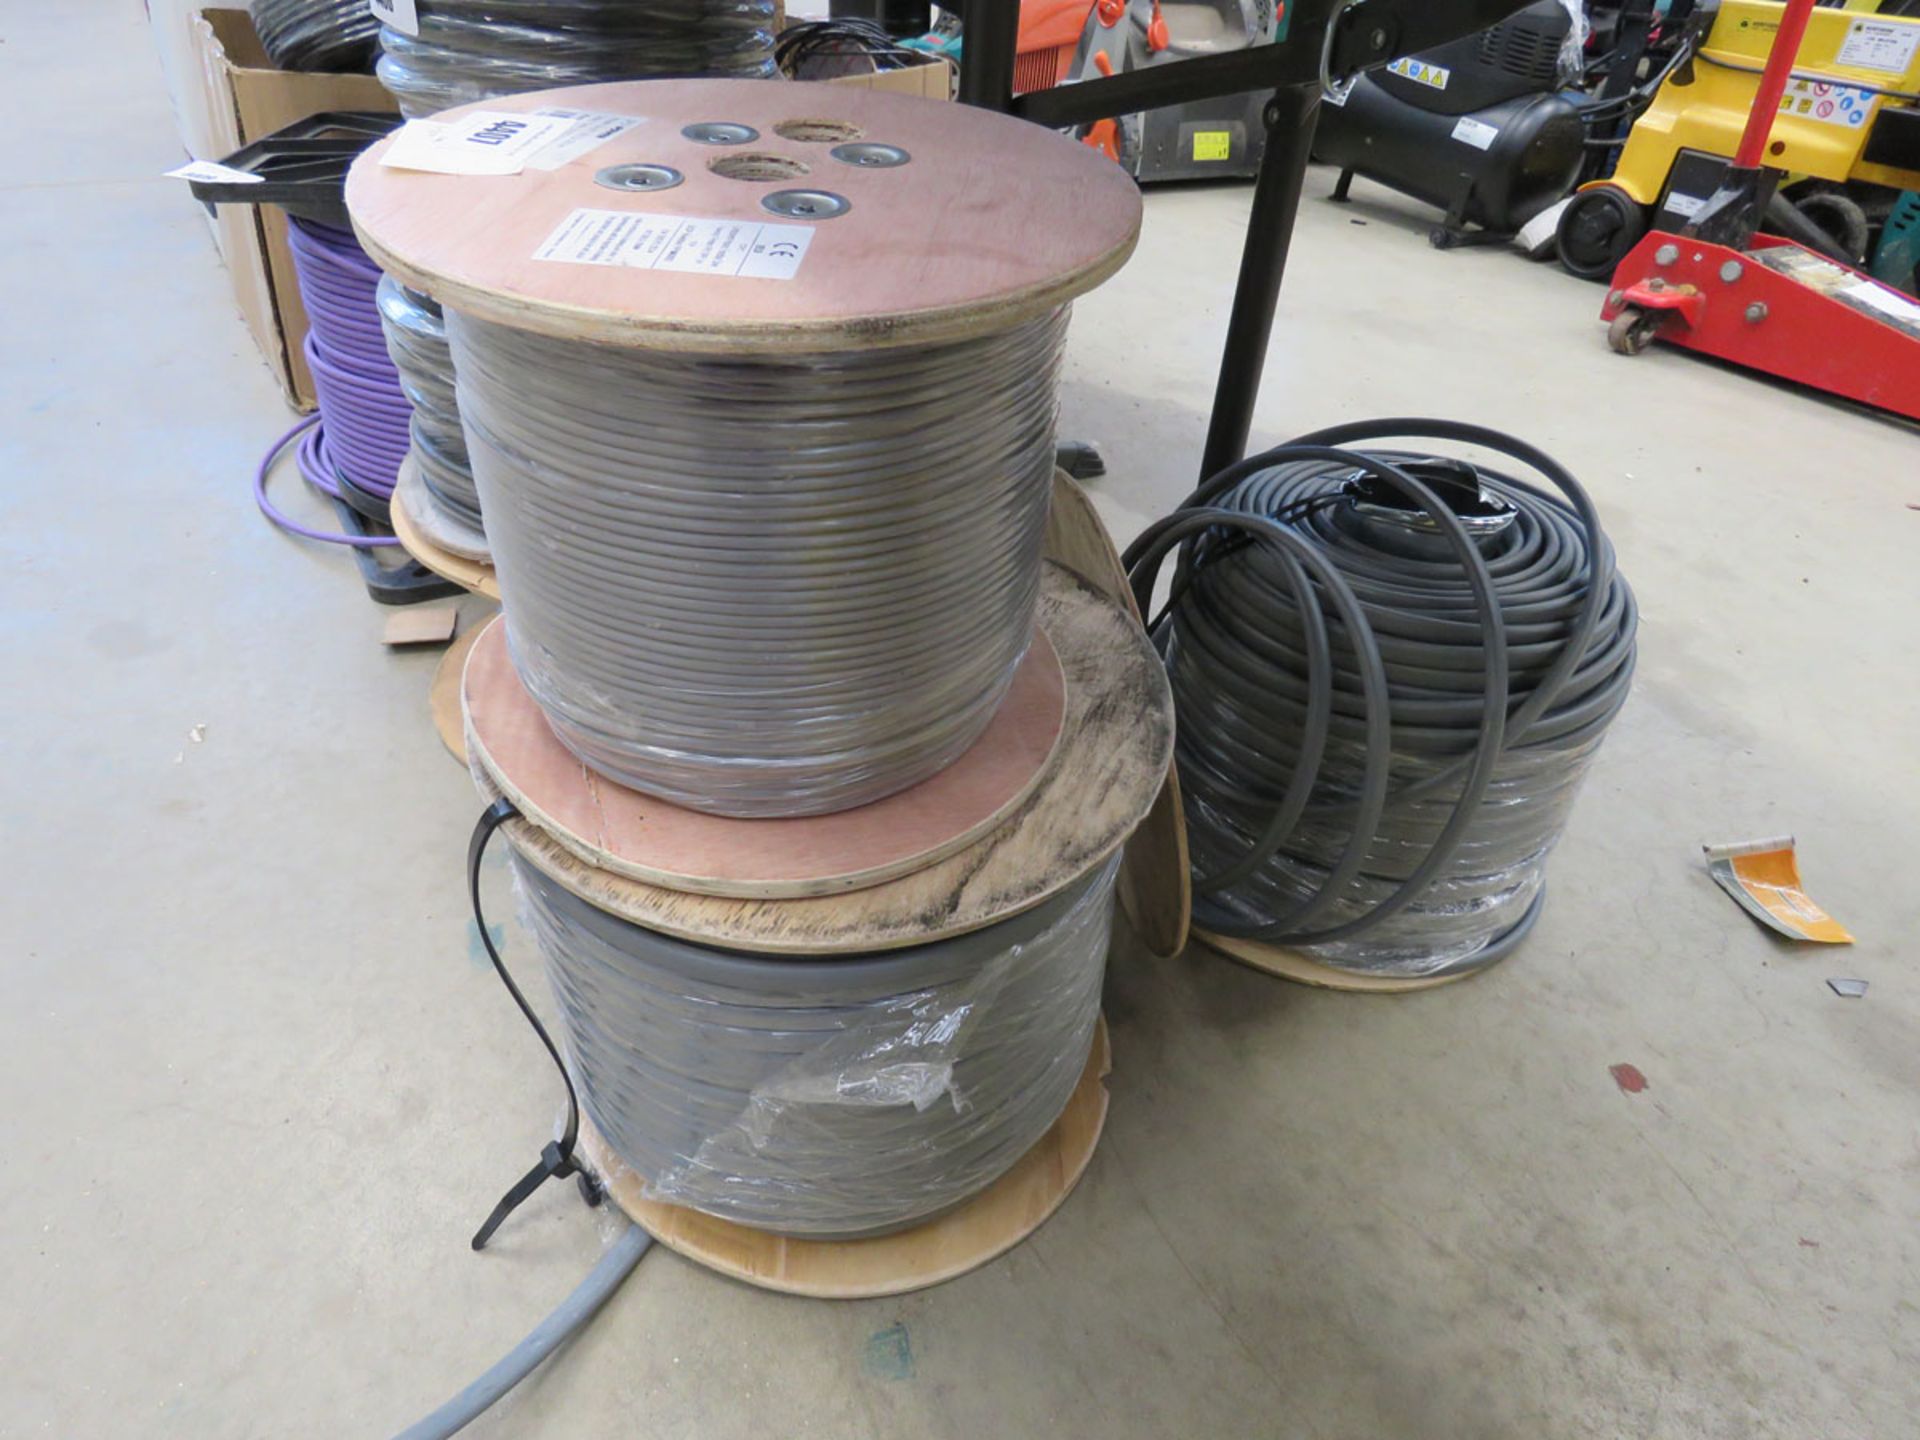 2 Rolls of household cable and some speaker wire